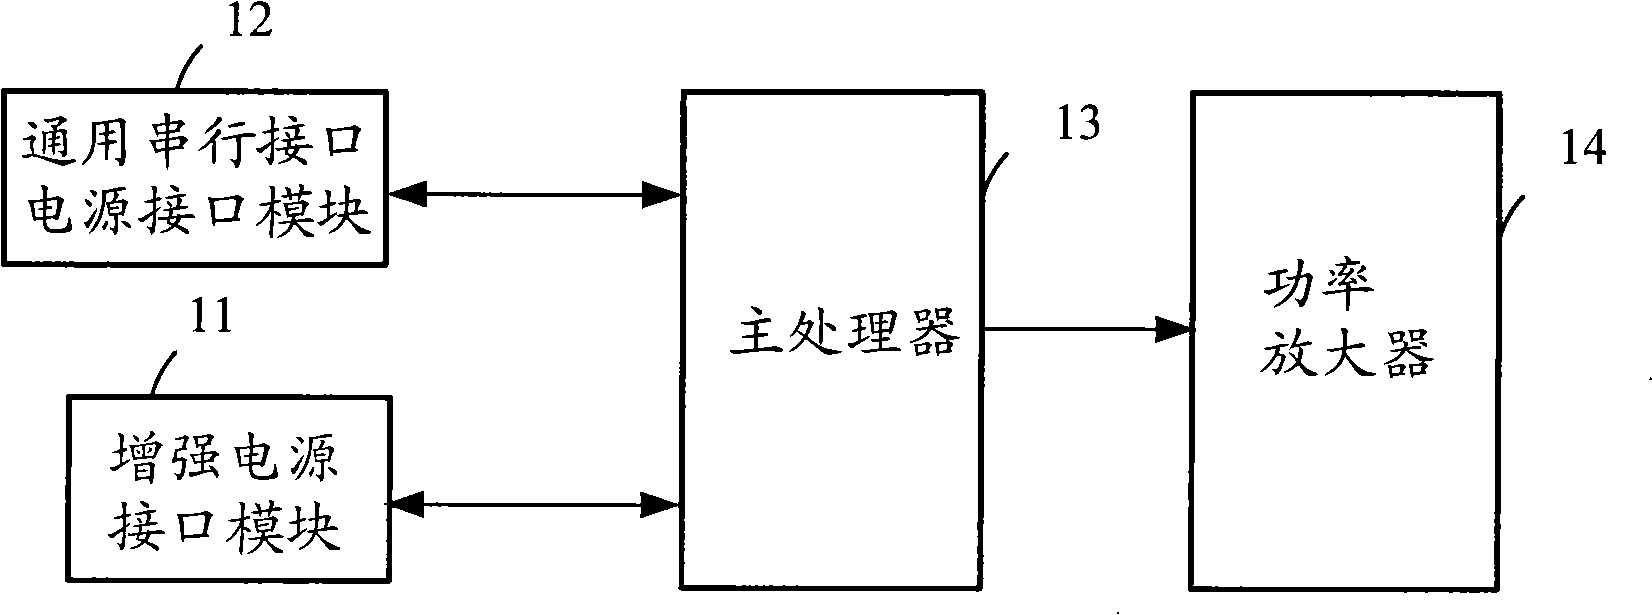 Method for adjusting emission power of wireless data card and wireless data card therefor